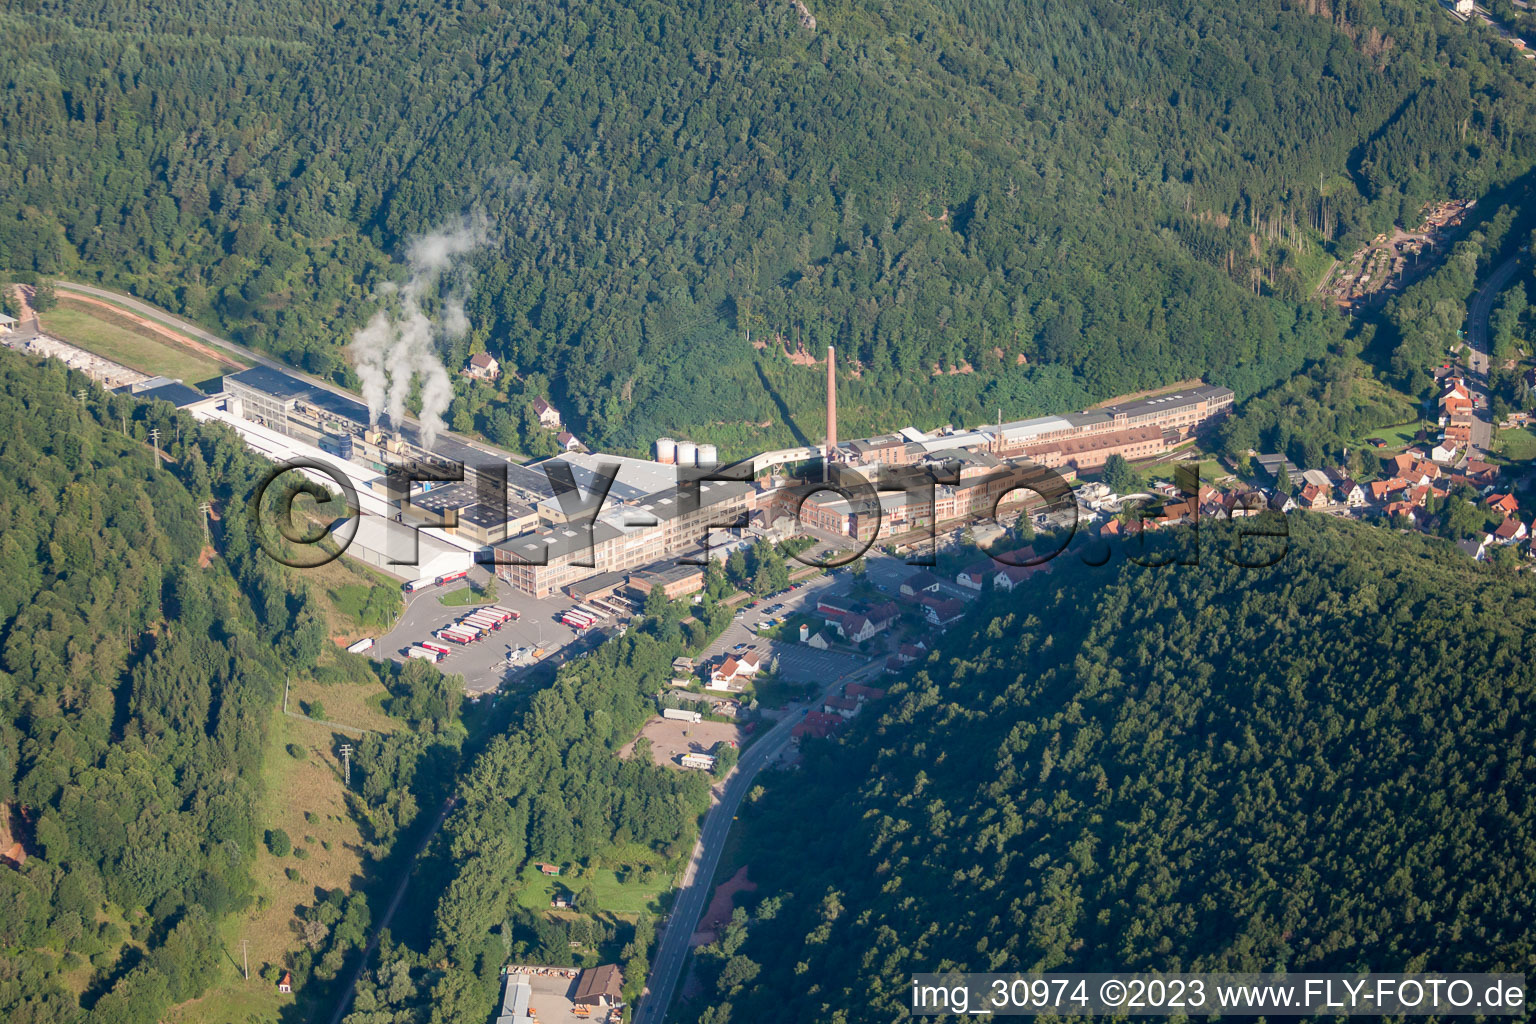 Oblique view of Cardboard factory Buchmann GmbH in the district Sarnstall in Annweiler am Trifels in the state Rhineland-Palatinate, Germany